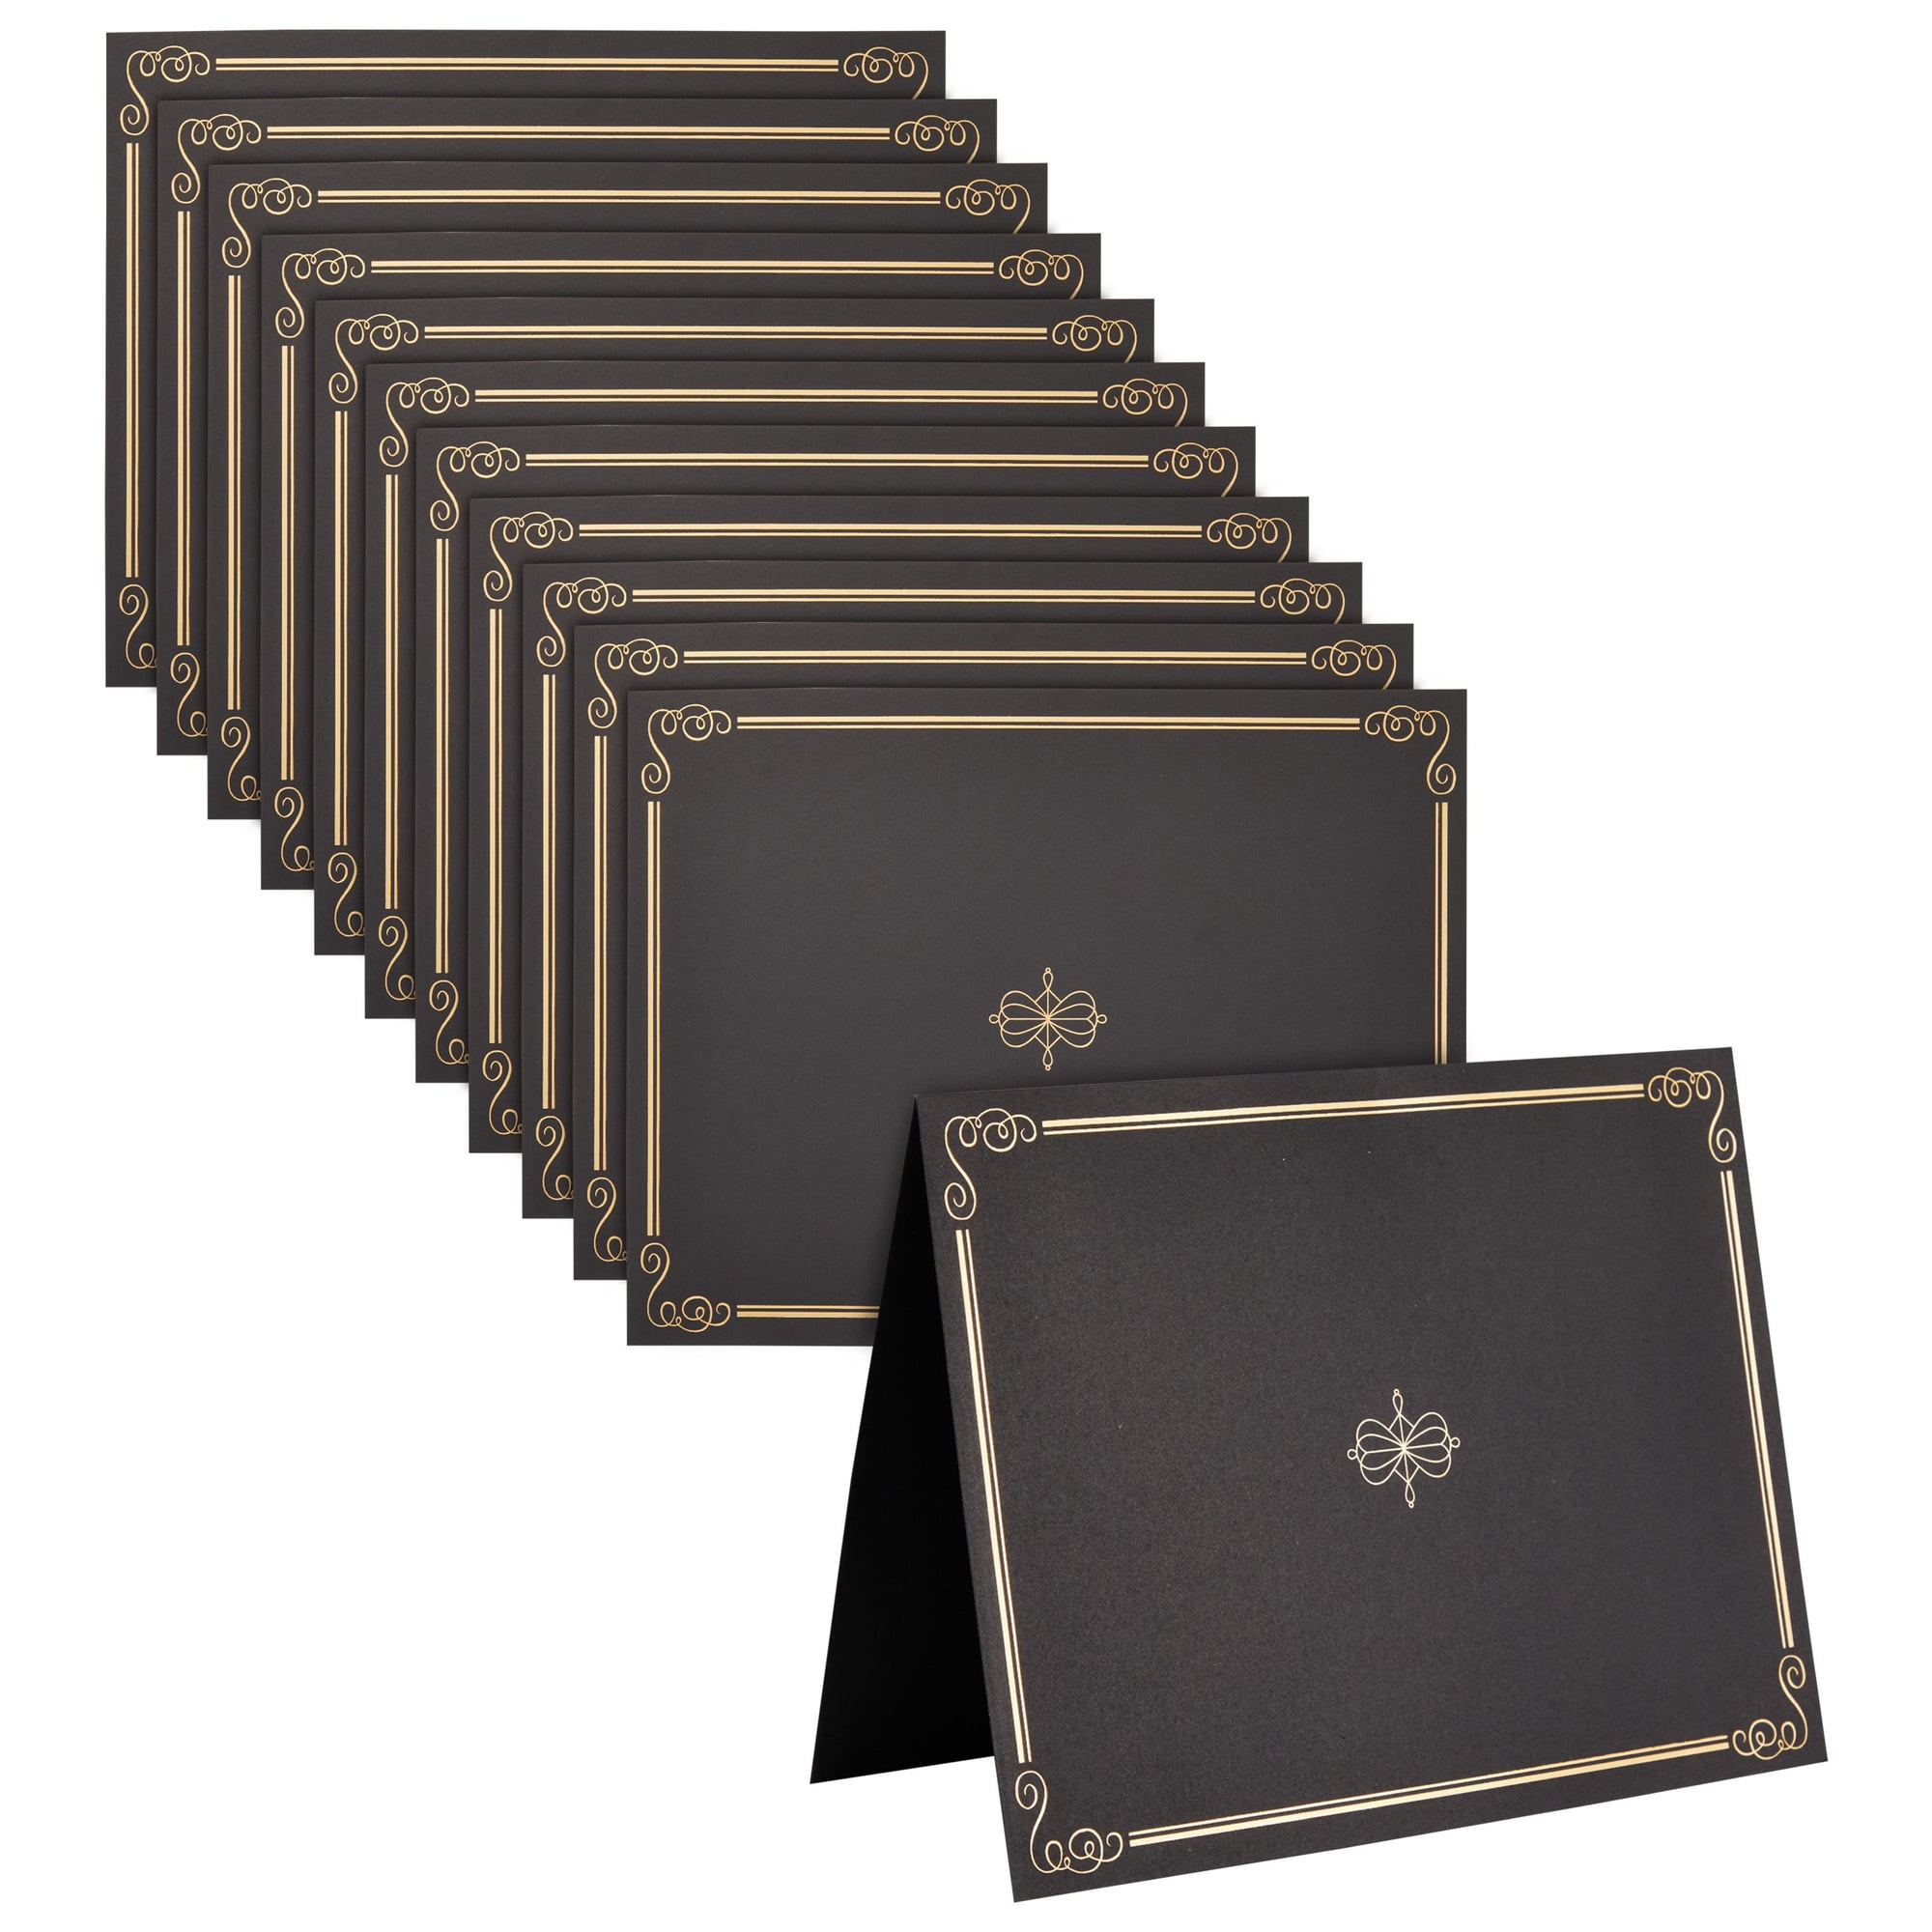 24 Certificate Holders and 24 Certificate 8.5 x 11 Letter-Size Papers,  Certificate Kit for Graduation Diplomas, Accomplishment Awards, Employee  Appreciation (11.3x8.8 In)